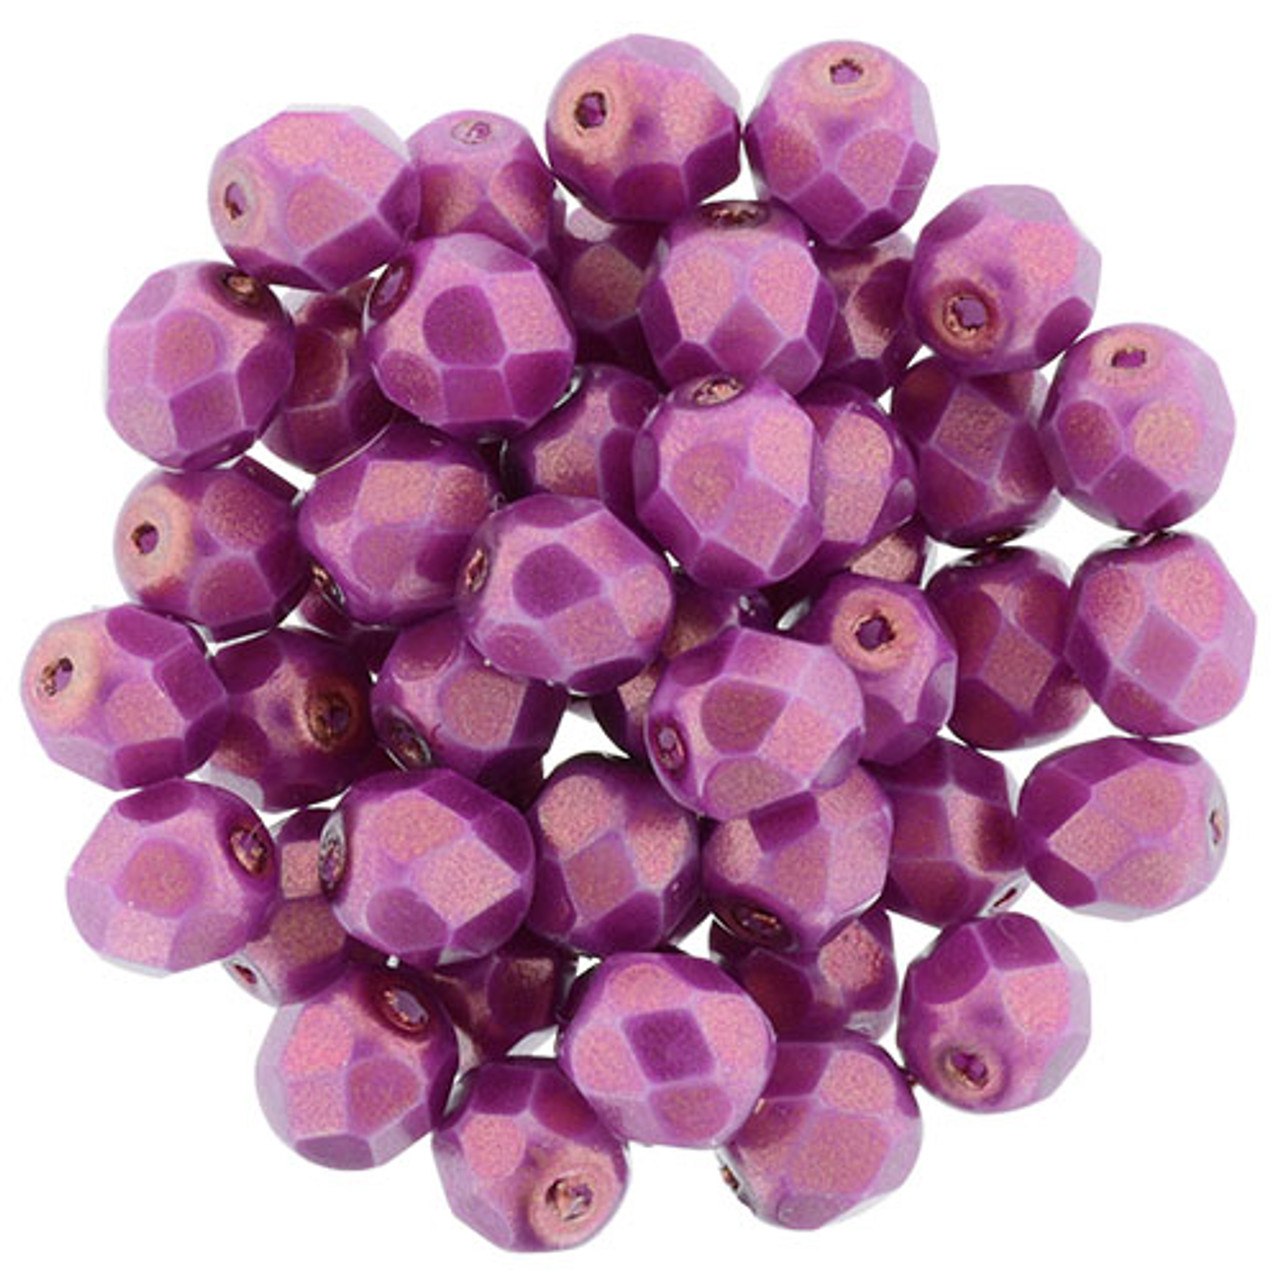 6mm Halo Ethereal Madder Rose Fire Polish Beads (25 Beads)